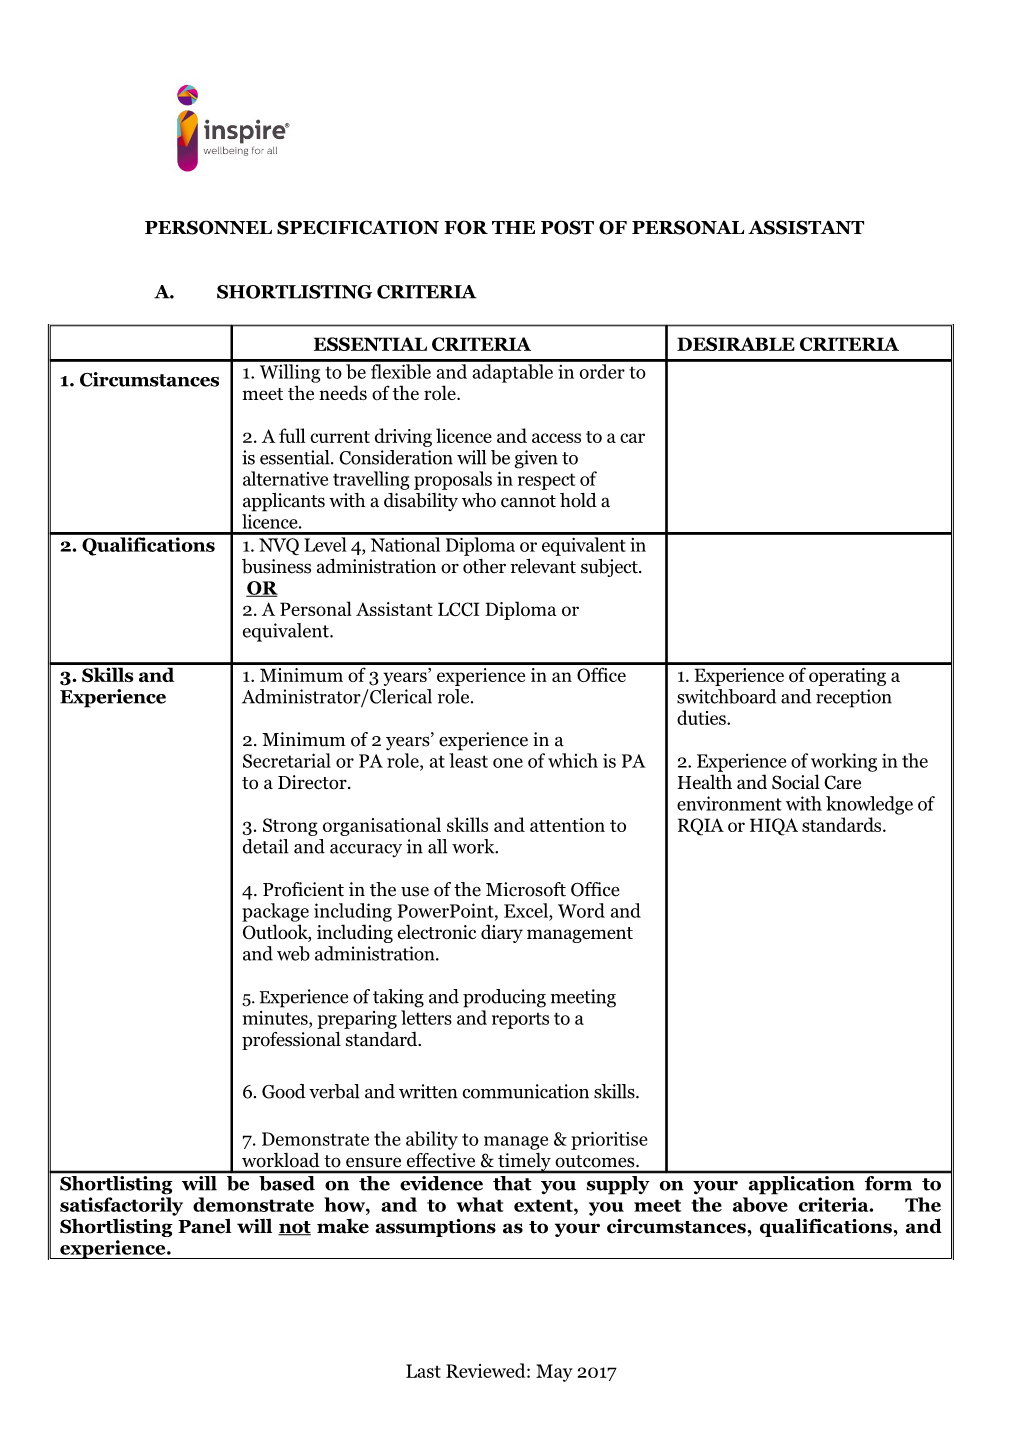 Personnel Specification for the Post of Personalassistant